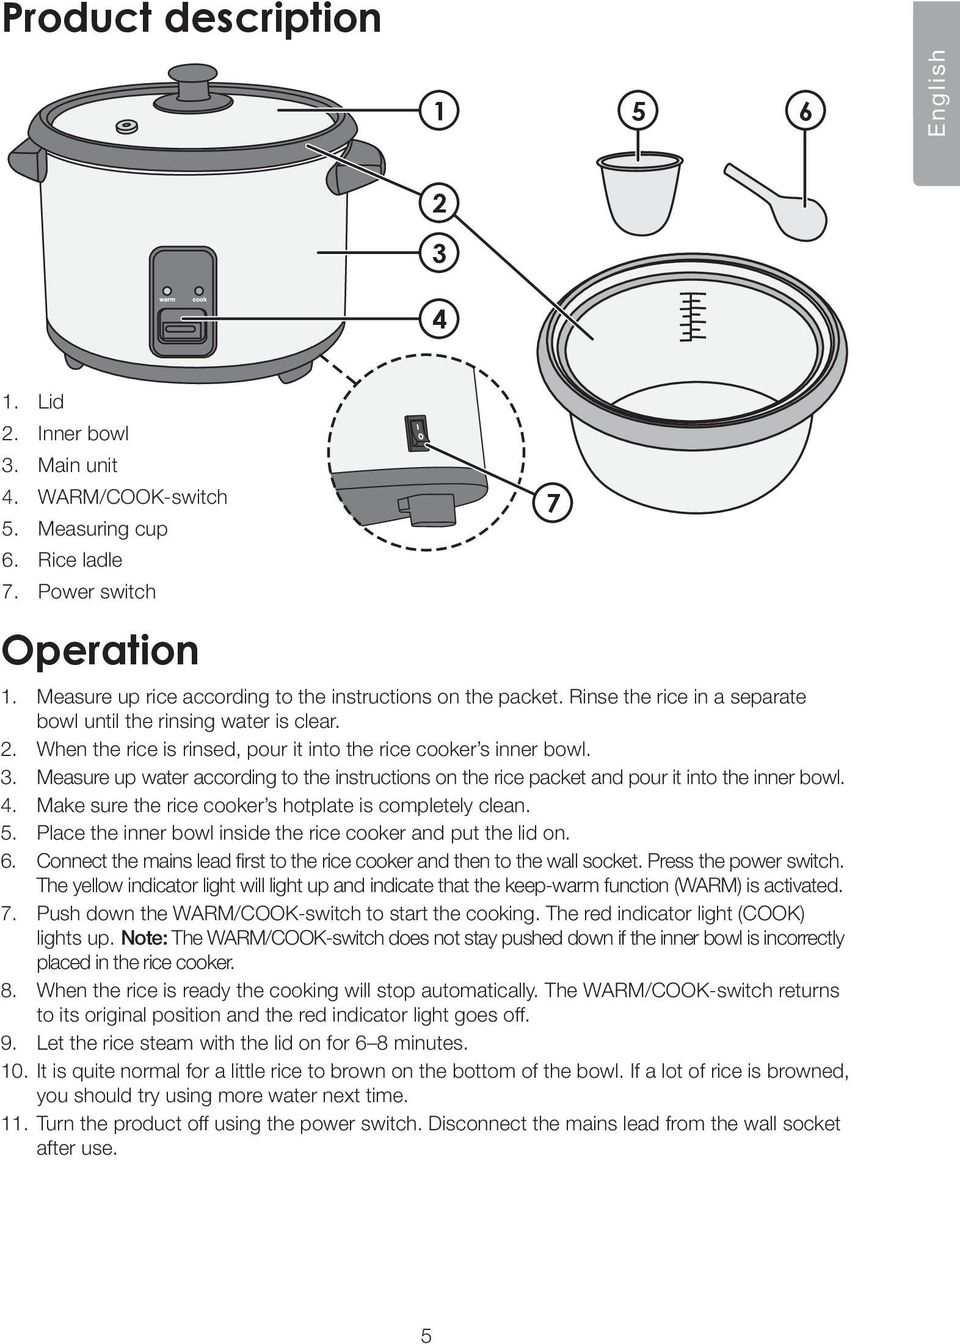 3. Measure up water according to the instructions on the rice packet and pour it into the inner bowl. 4. Make sure the rice cooker s hotplate is completely clean. 5.